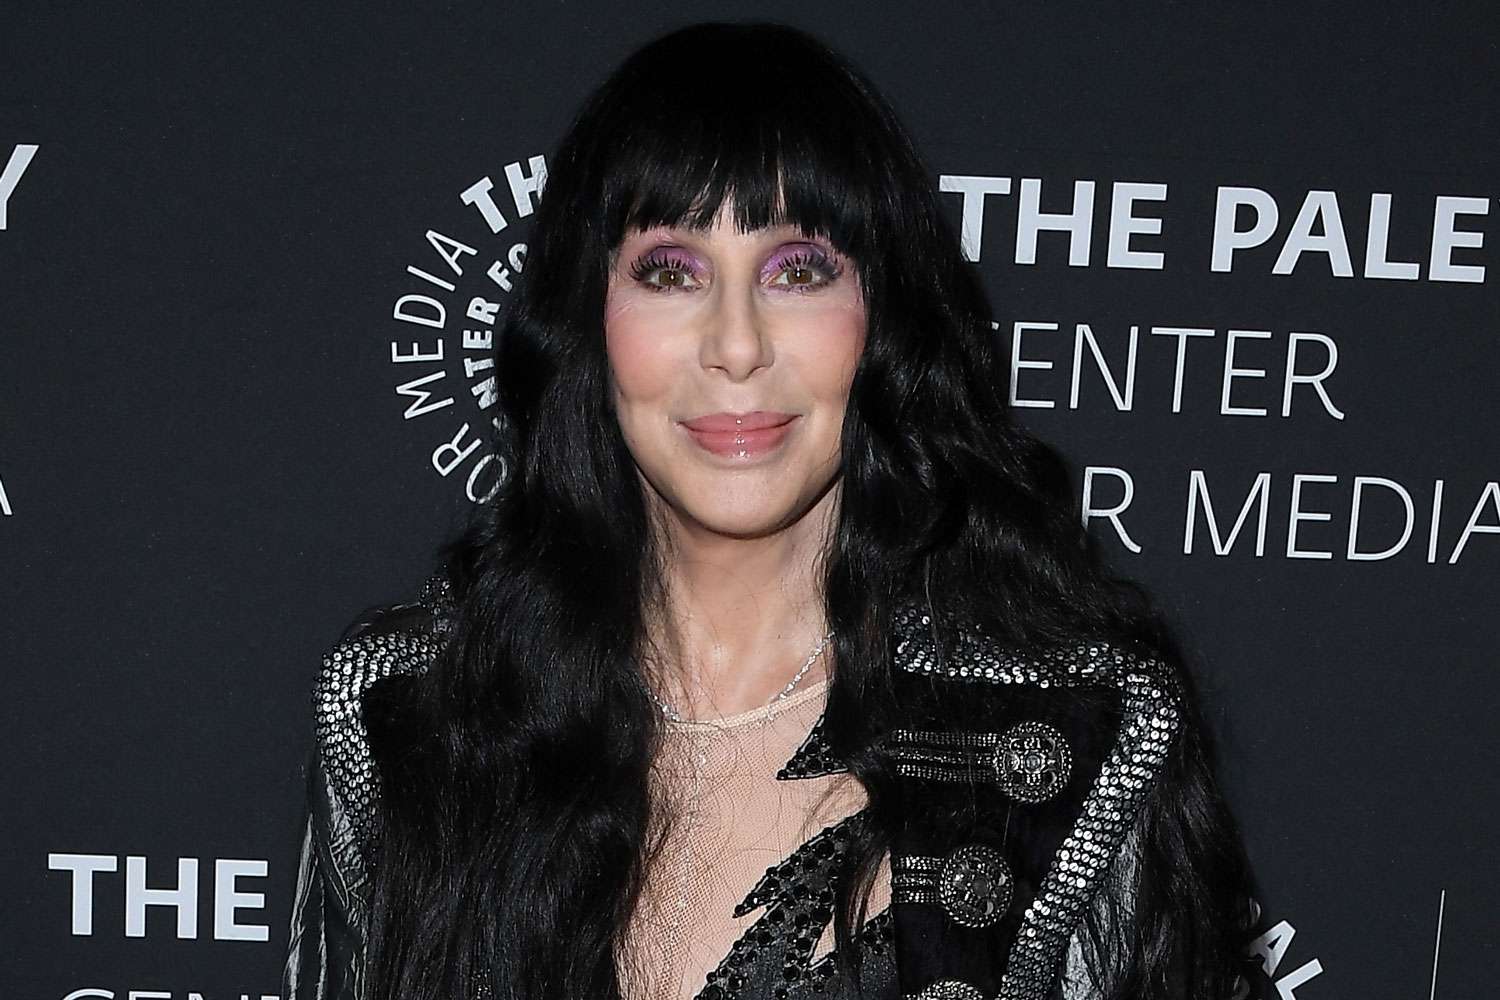 Cher Wins Copyright Lawsuit Against Ex-Husband Sonny Bono's Widow Mary over Song Royalties